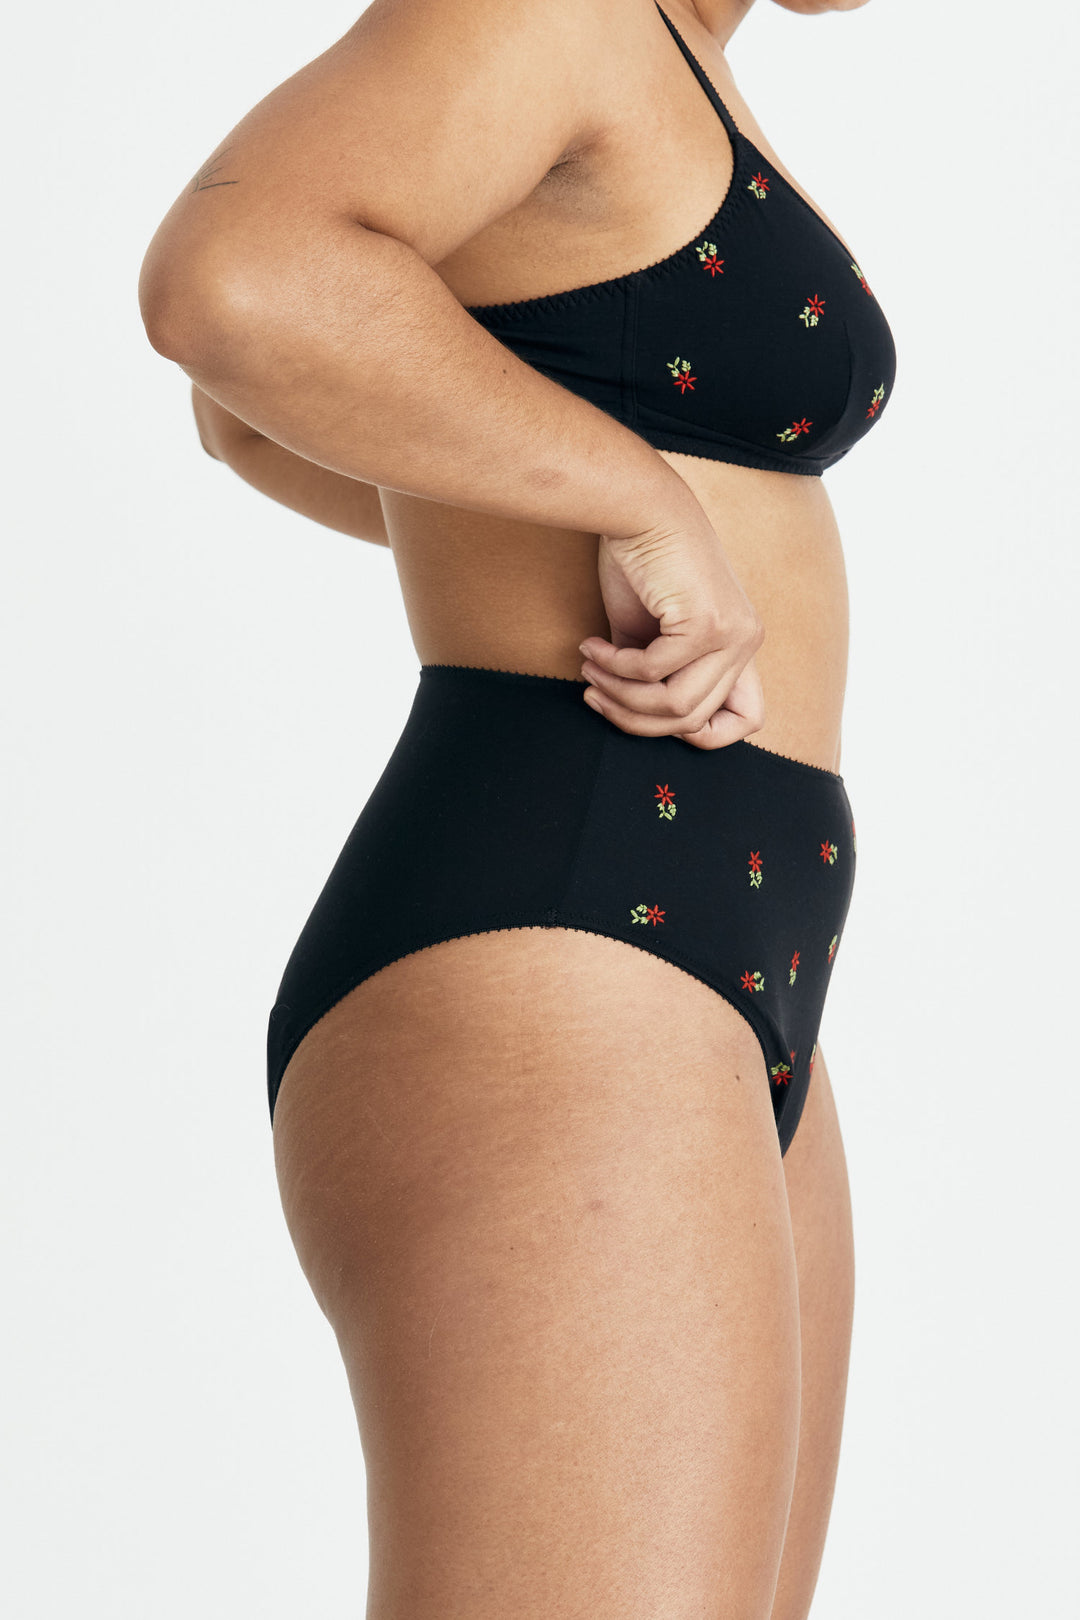 Videris Lingerie high waist knicker in black blossom embroidered TENCEL™ with a flattering legline curving over the hip